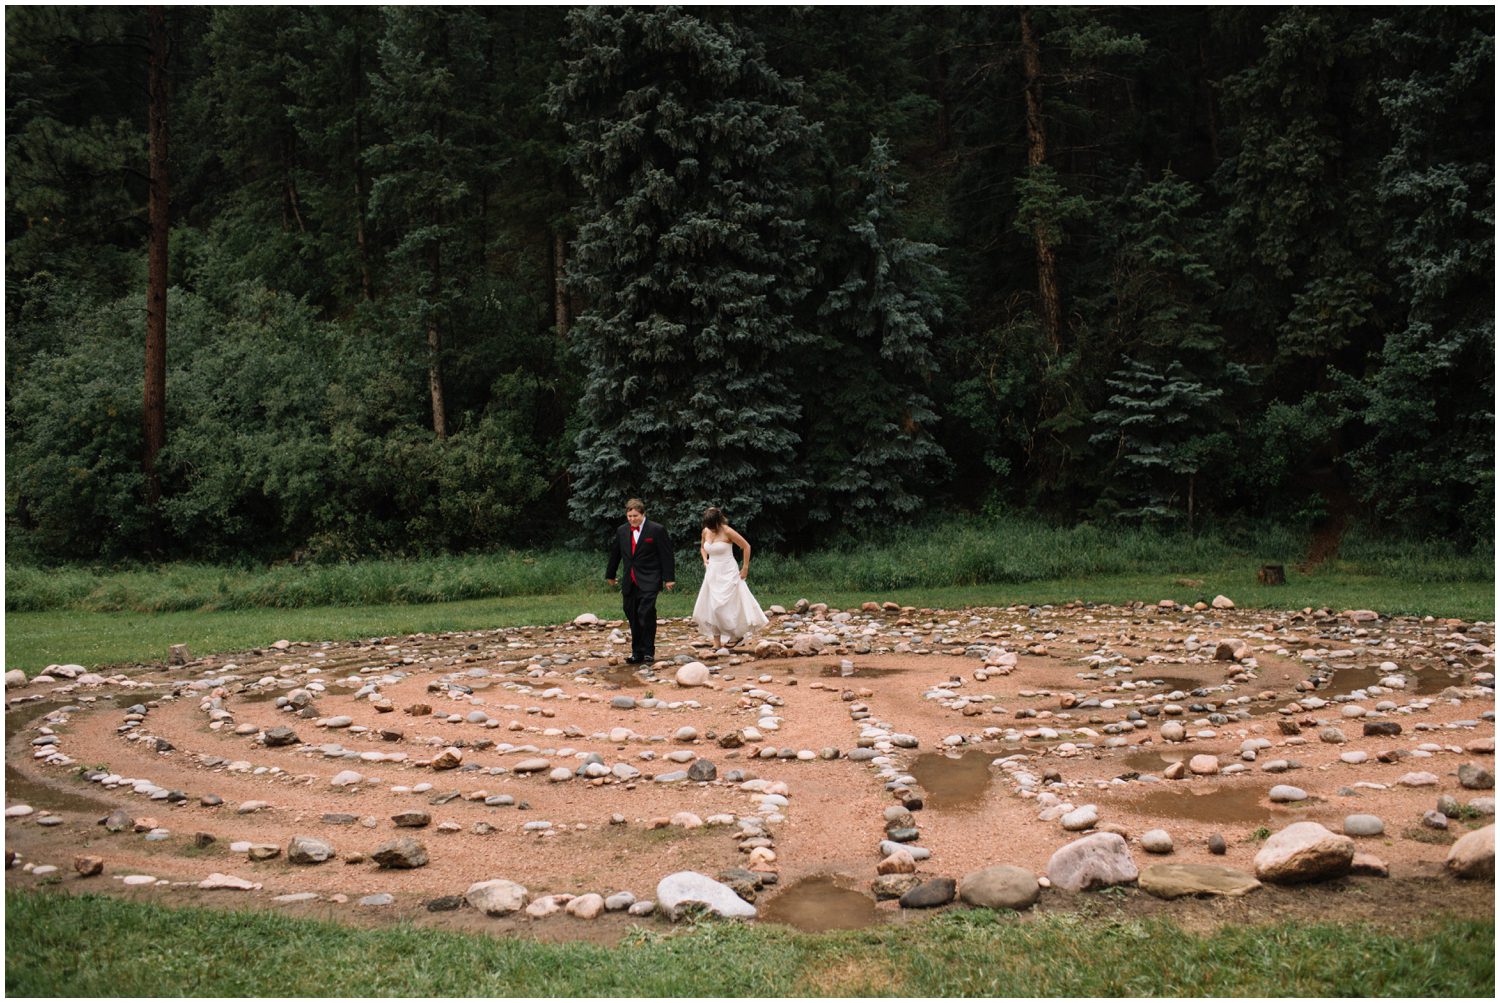 Labyrinth, Unique Wedding Photos, Evergreen Colorado Wedding Photographer, The Church of Transfiguration, Colorado Wedding, Colorado Wedding Inspiration, Colorado, Evergreen Colorado, Wedding Inspiration, Bride and groom, Bride and groom posing, Unposed, Unposed Prompts, Show me your you